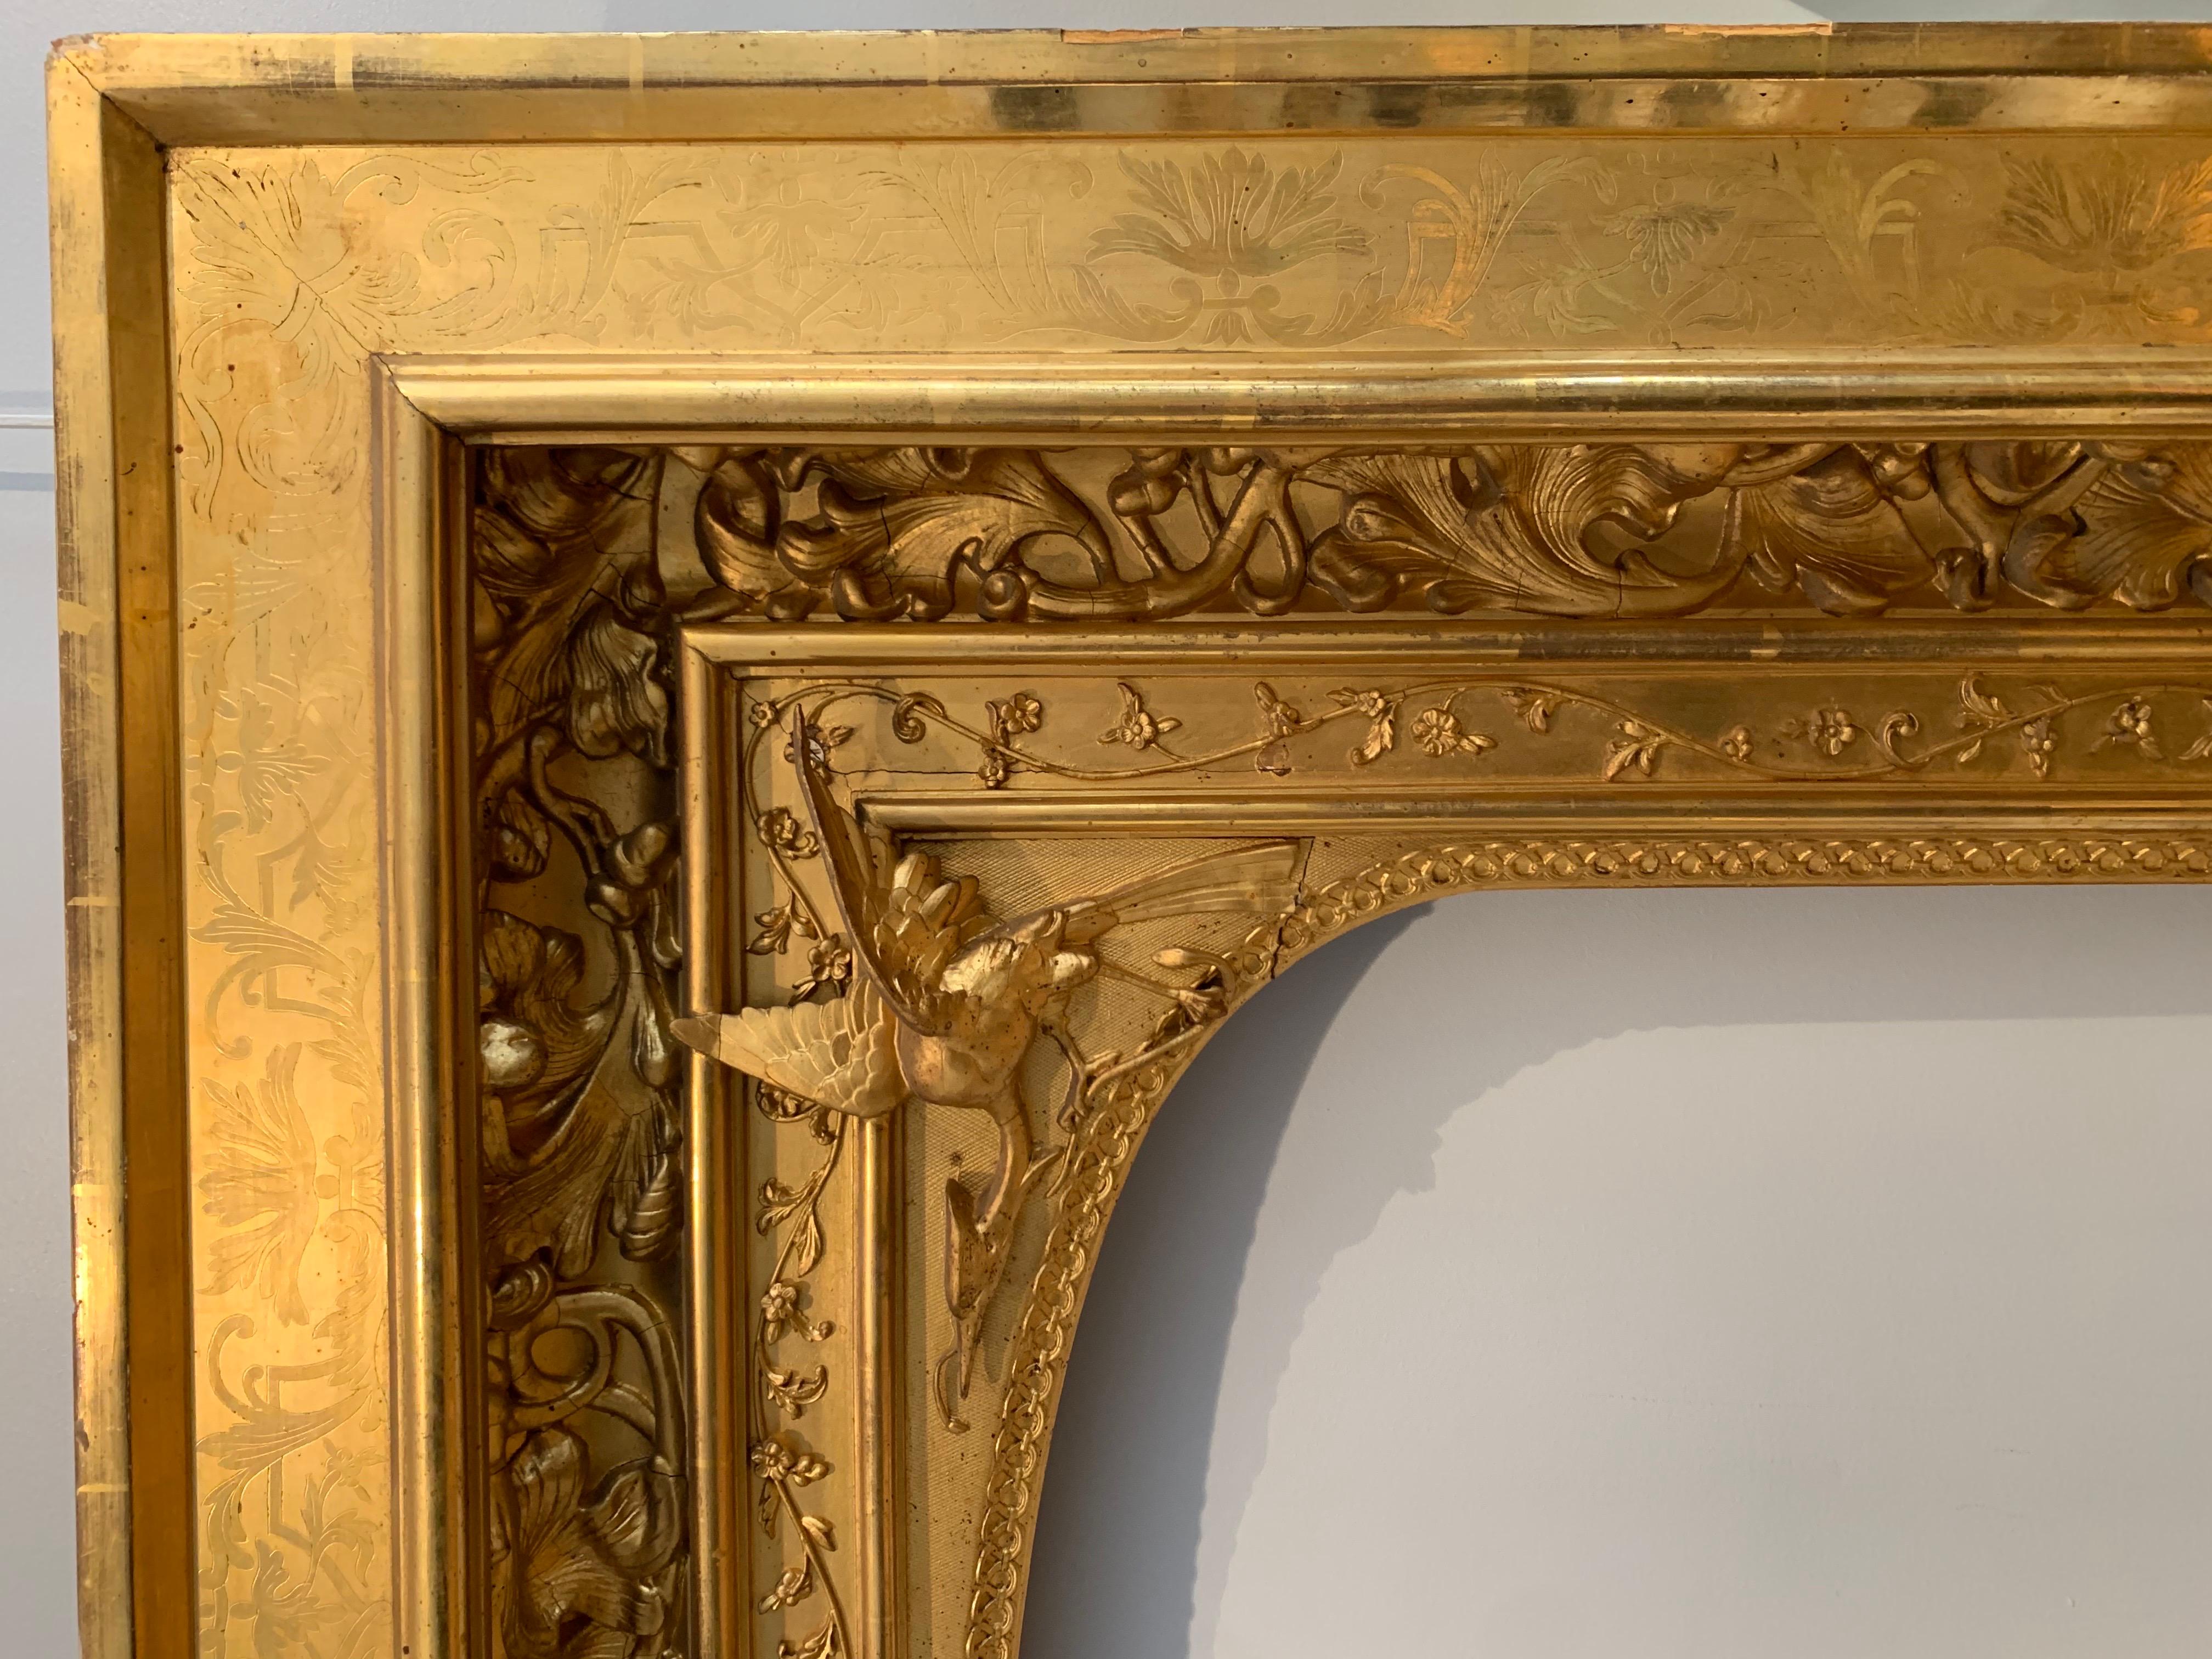 Very Large Renaissance Revival Gilded French Frame 19th Century, Circa 1835 For Sale 9